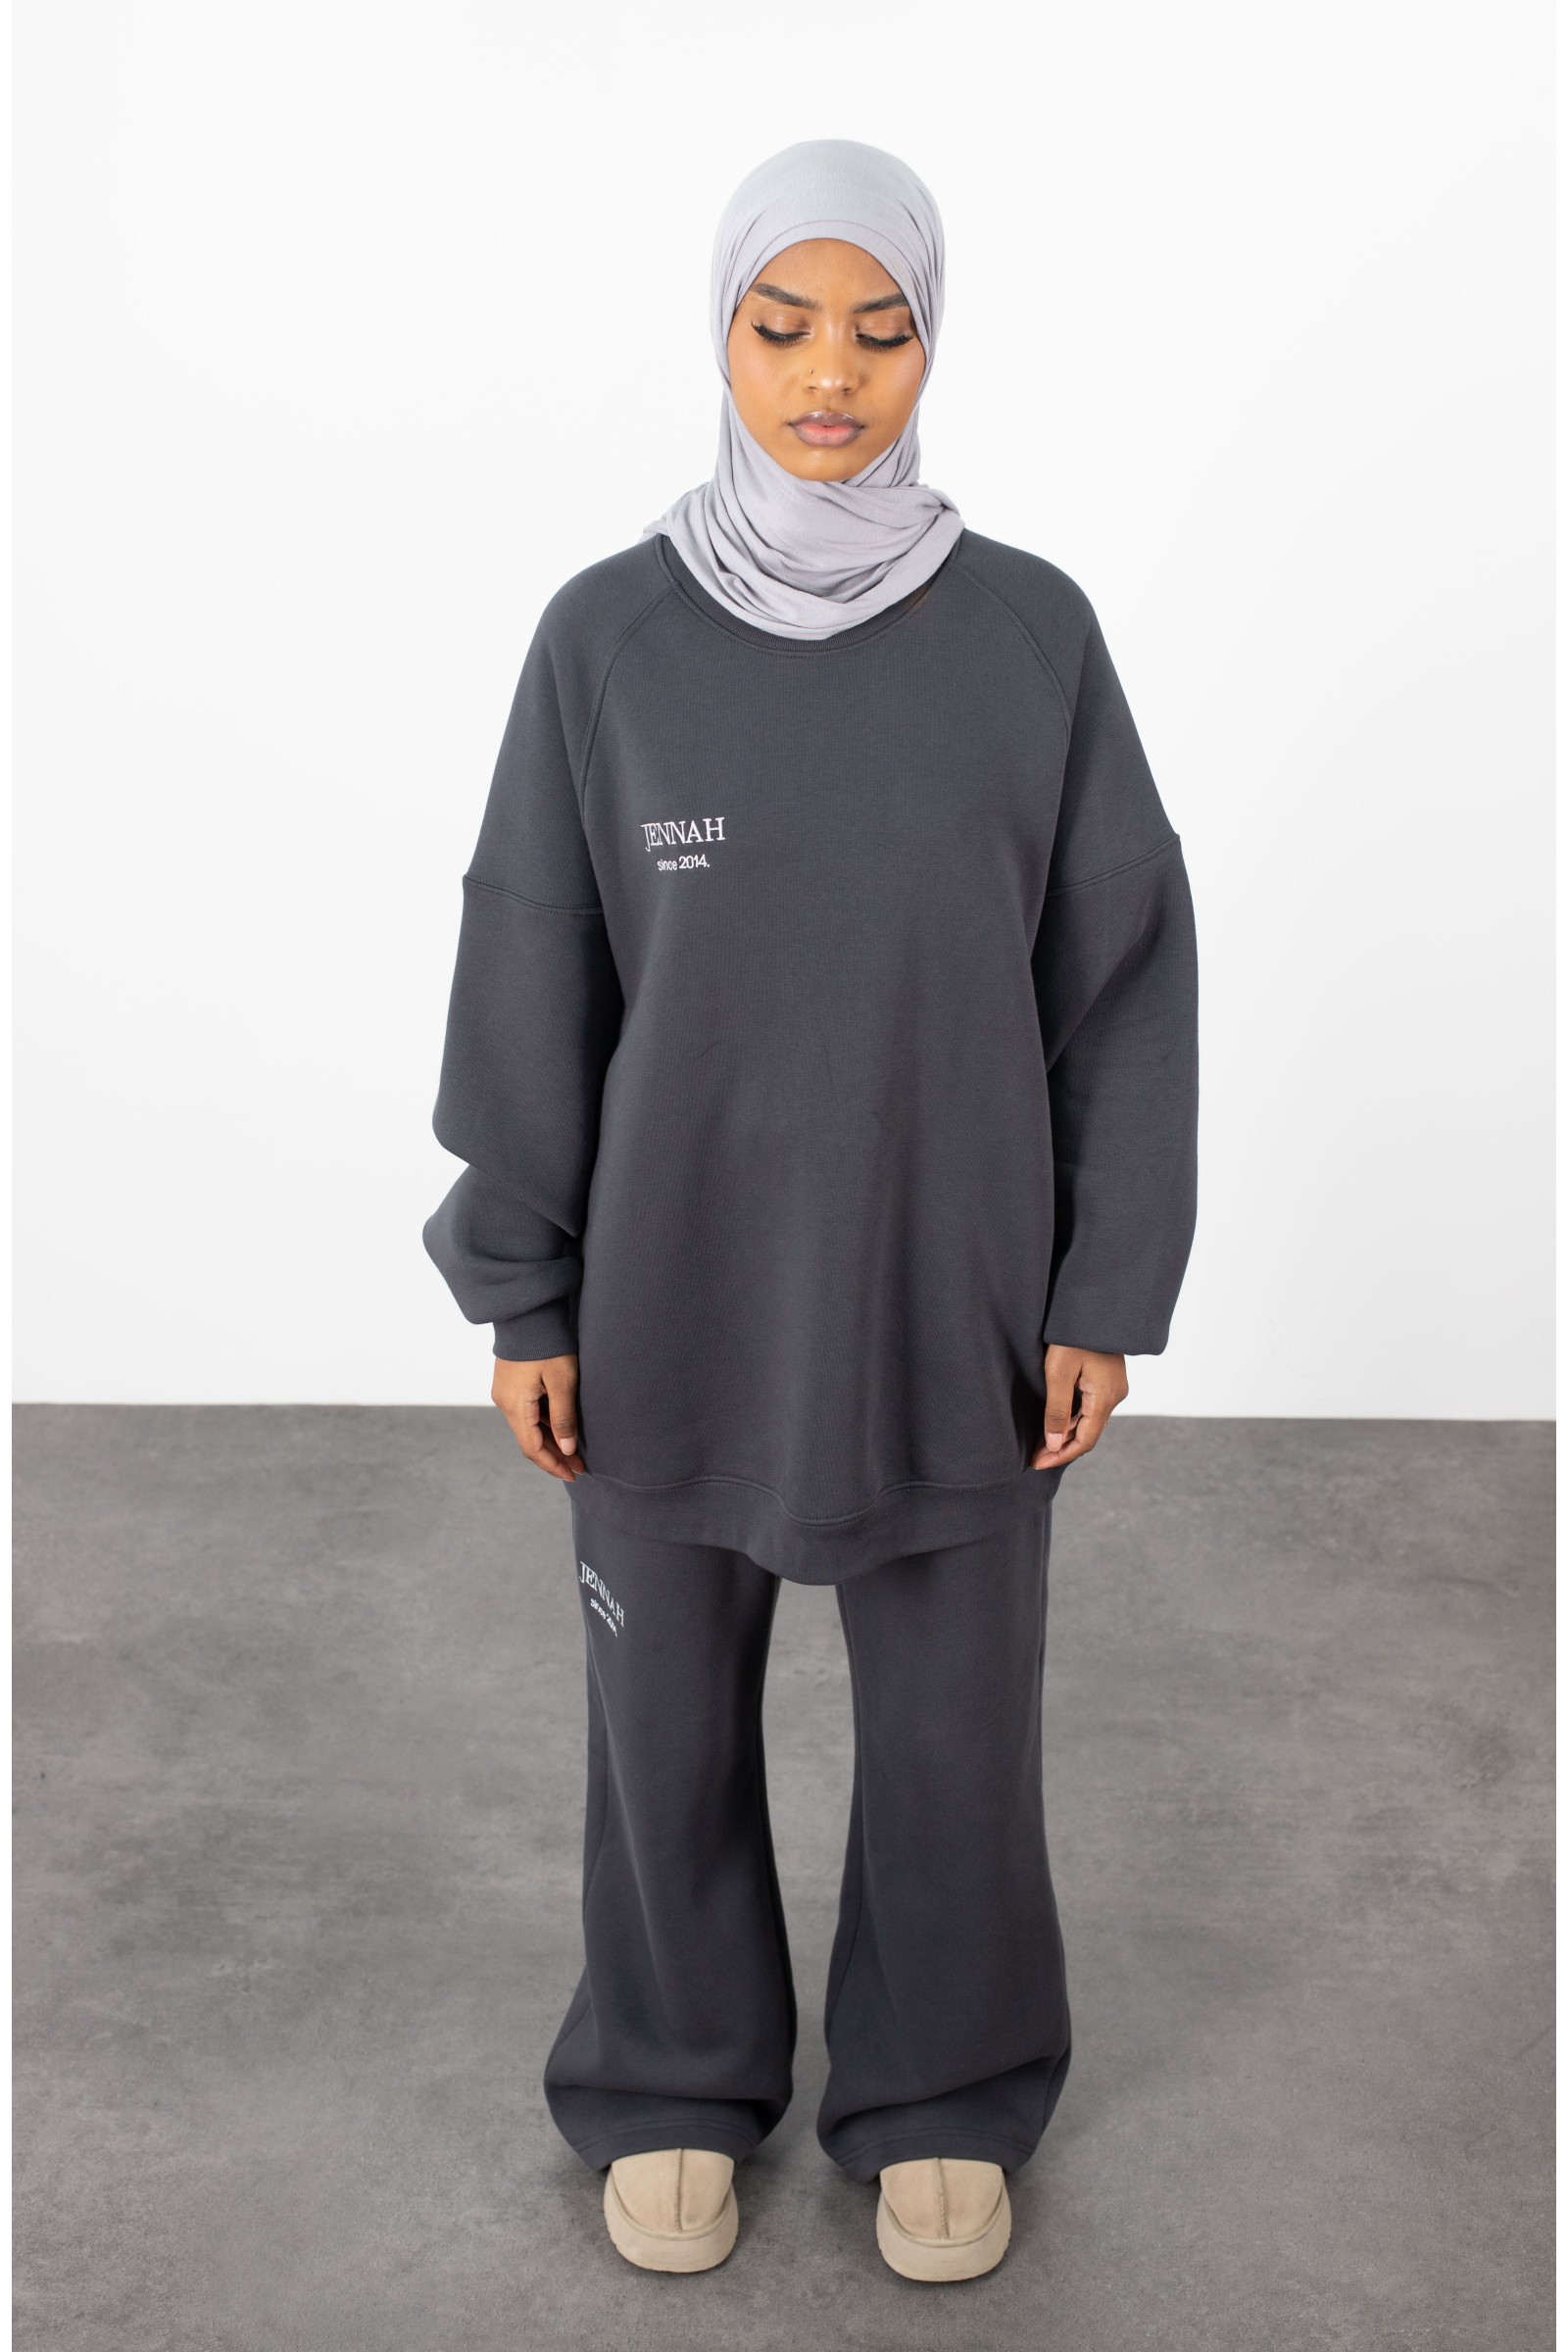 Loose-fitting jogger set with a round-neck pullover and no hood.